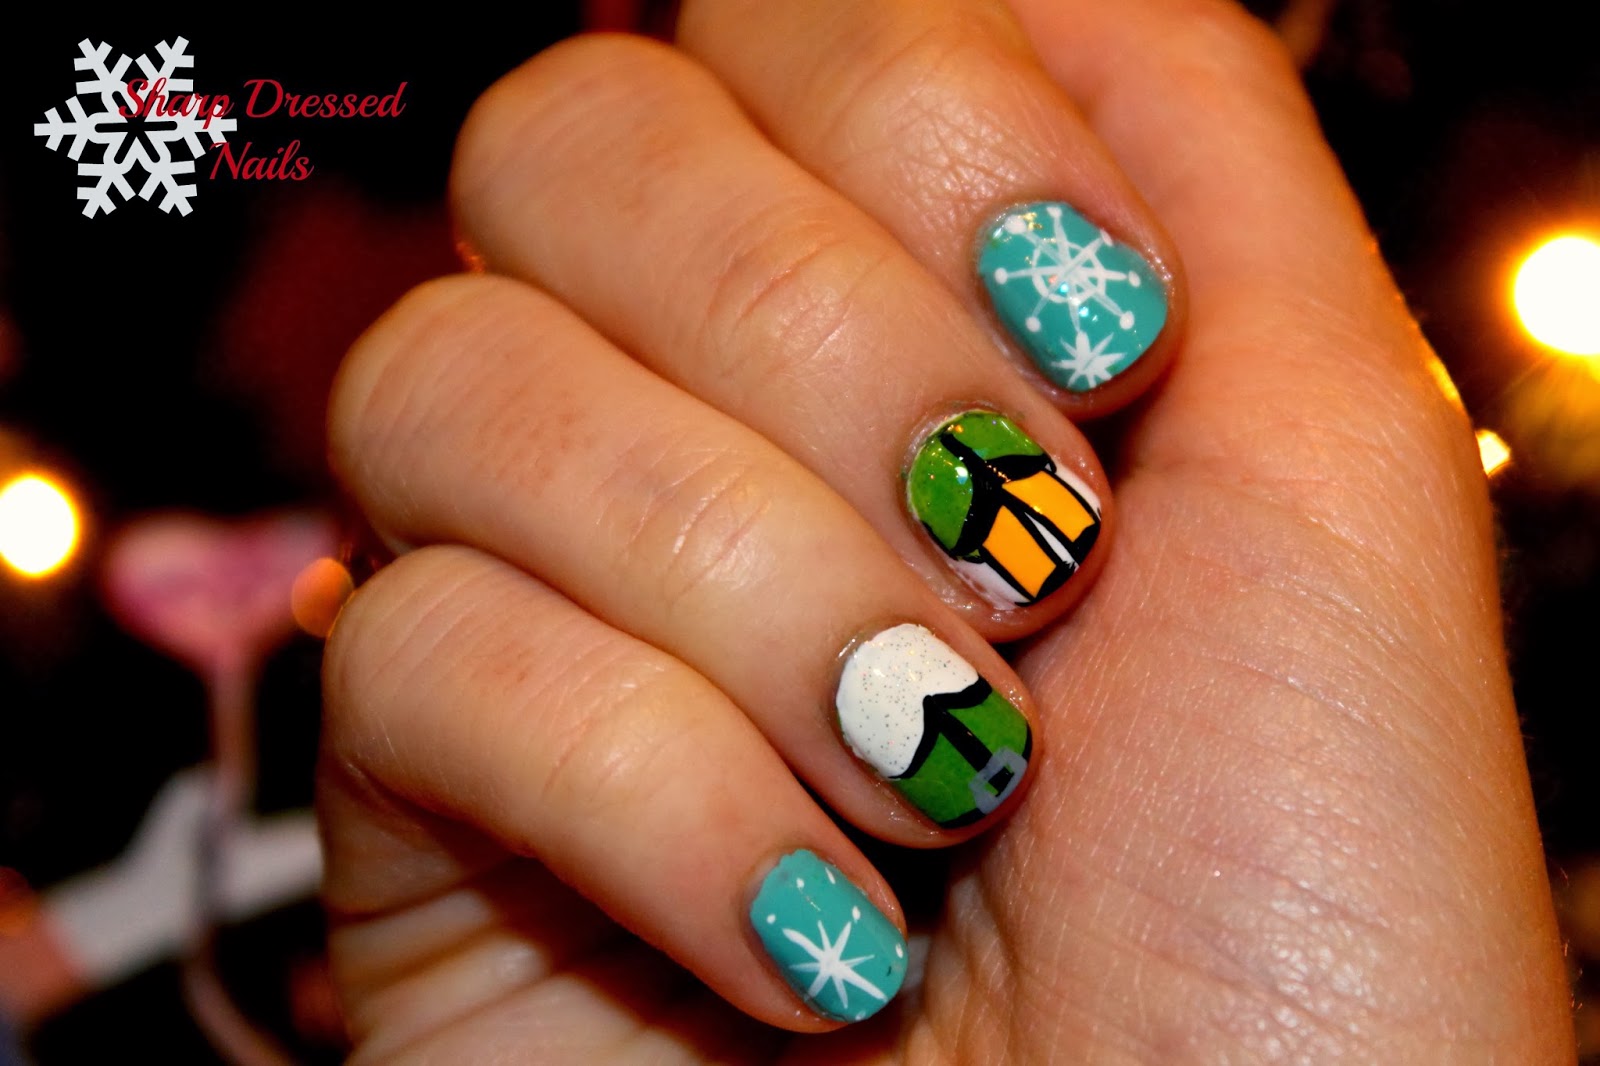 5. "Buddy the Elf" Christmas Sweater Nails - wide 7